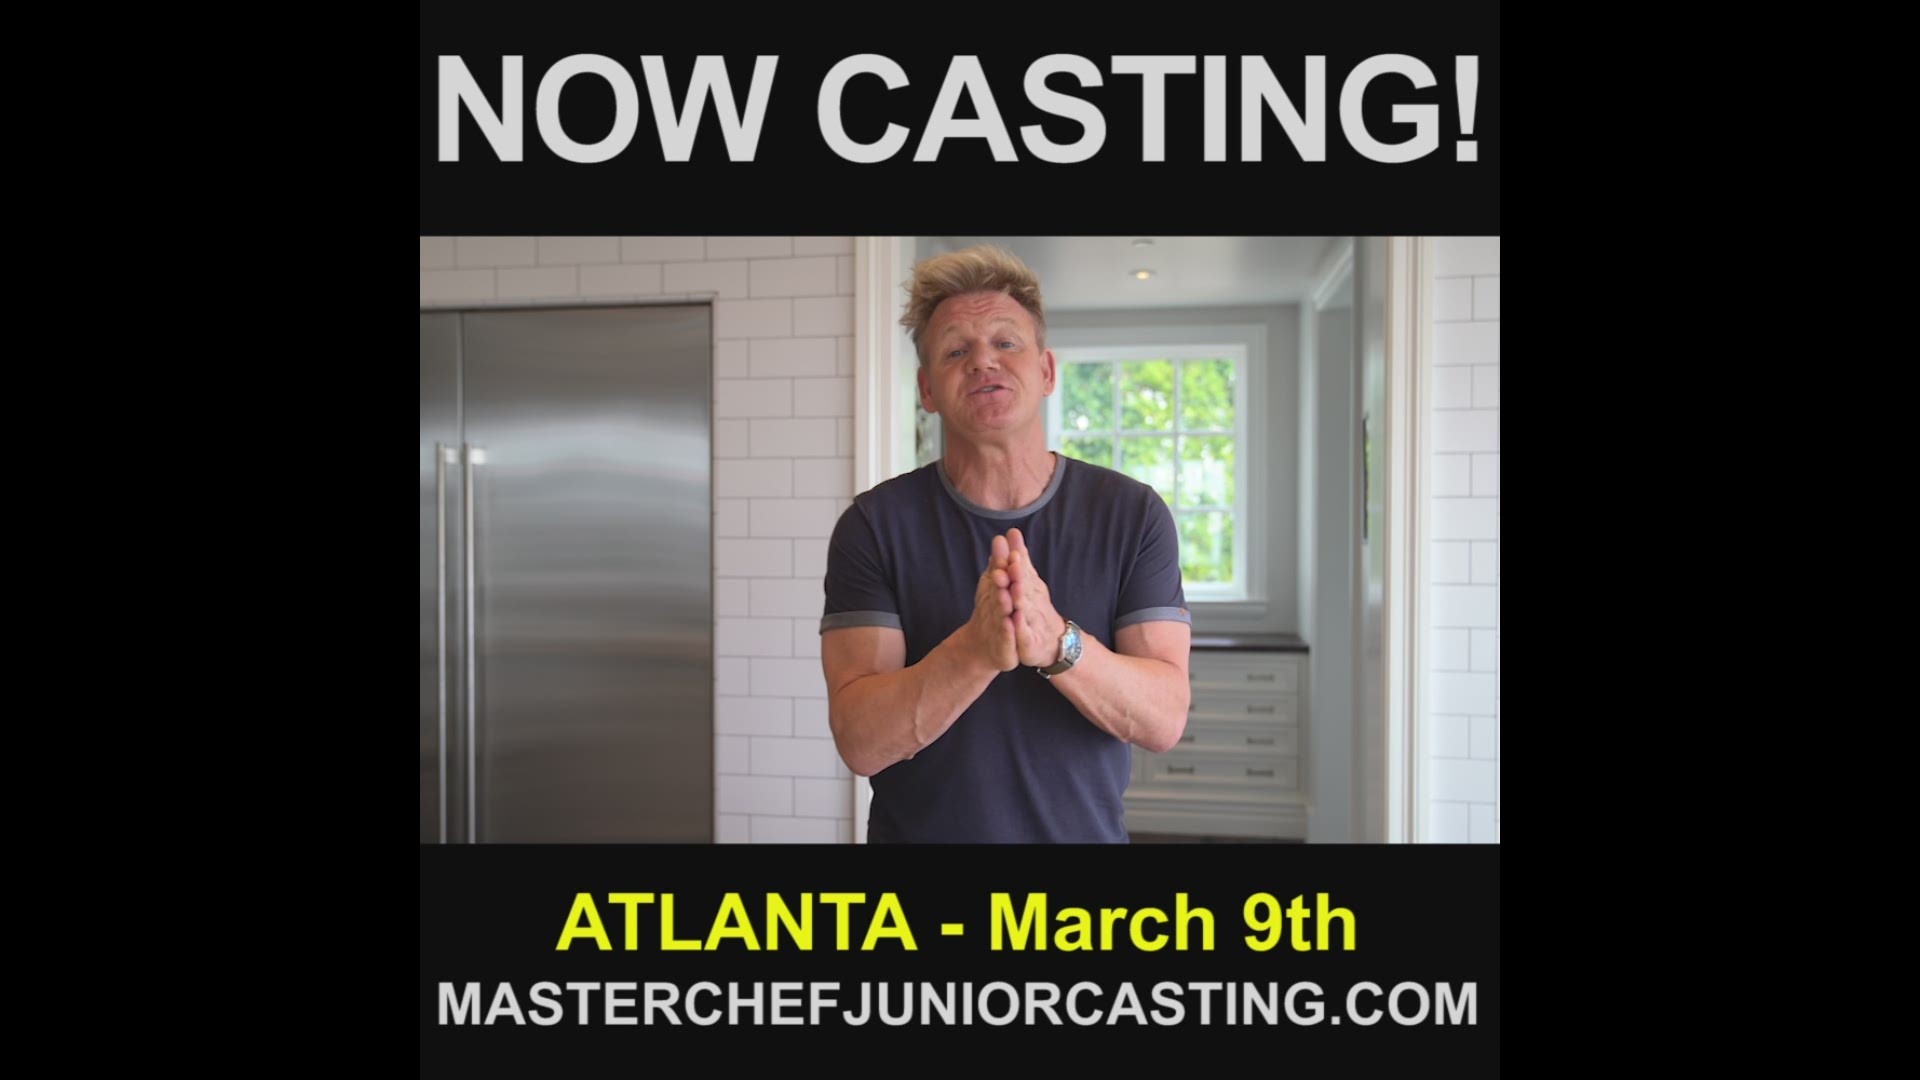 FOX’s MASTERCHEF JUNIOR is coming to Atlanta on March 9 in search for talented young cooks from all types of backgrounds and with a range of cooking styles.